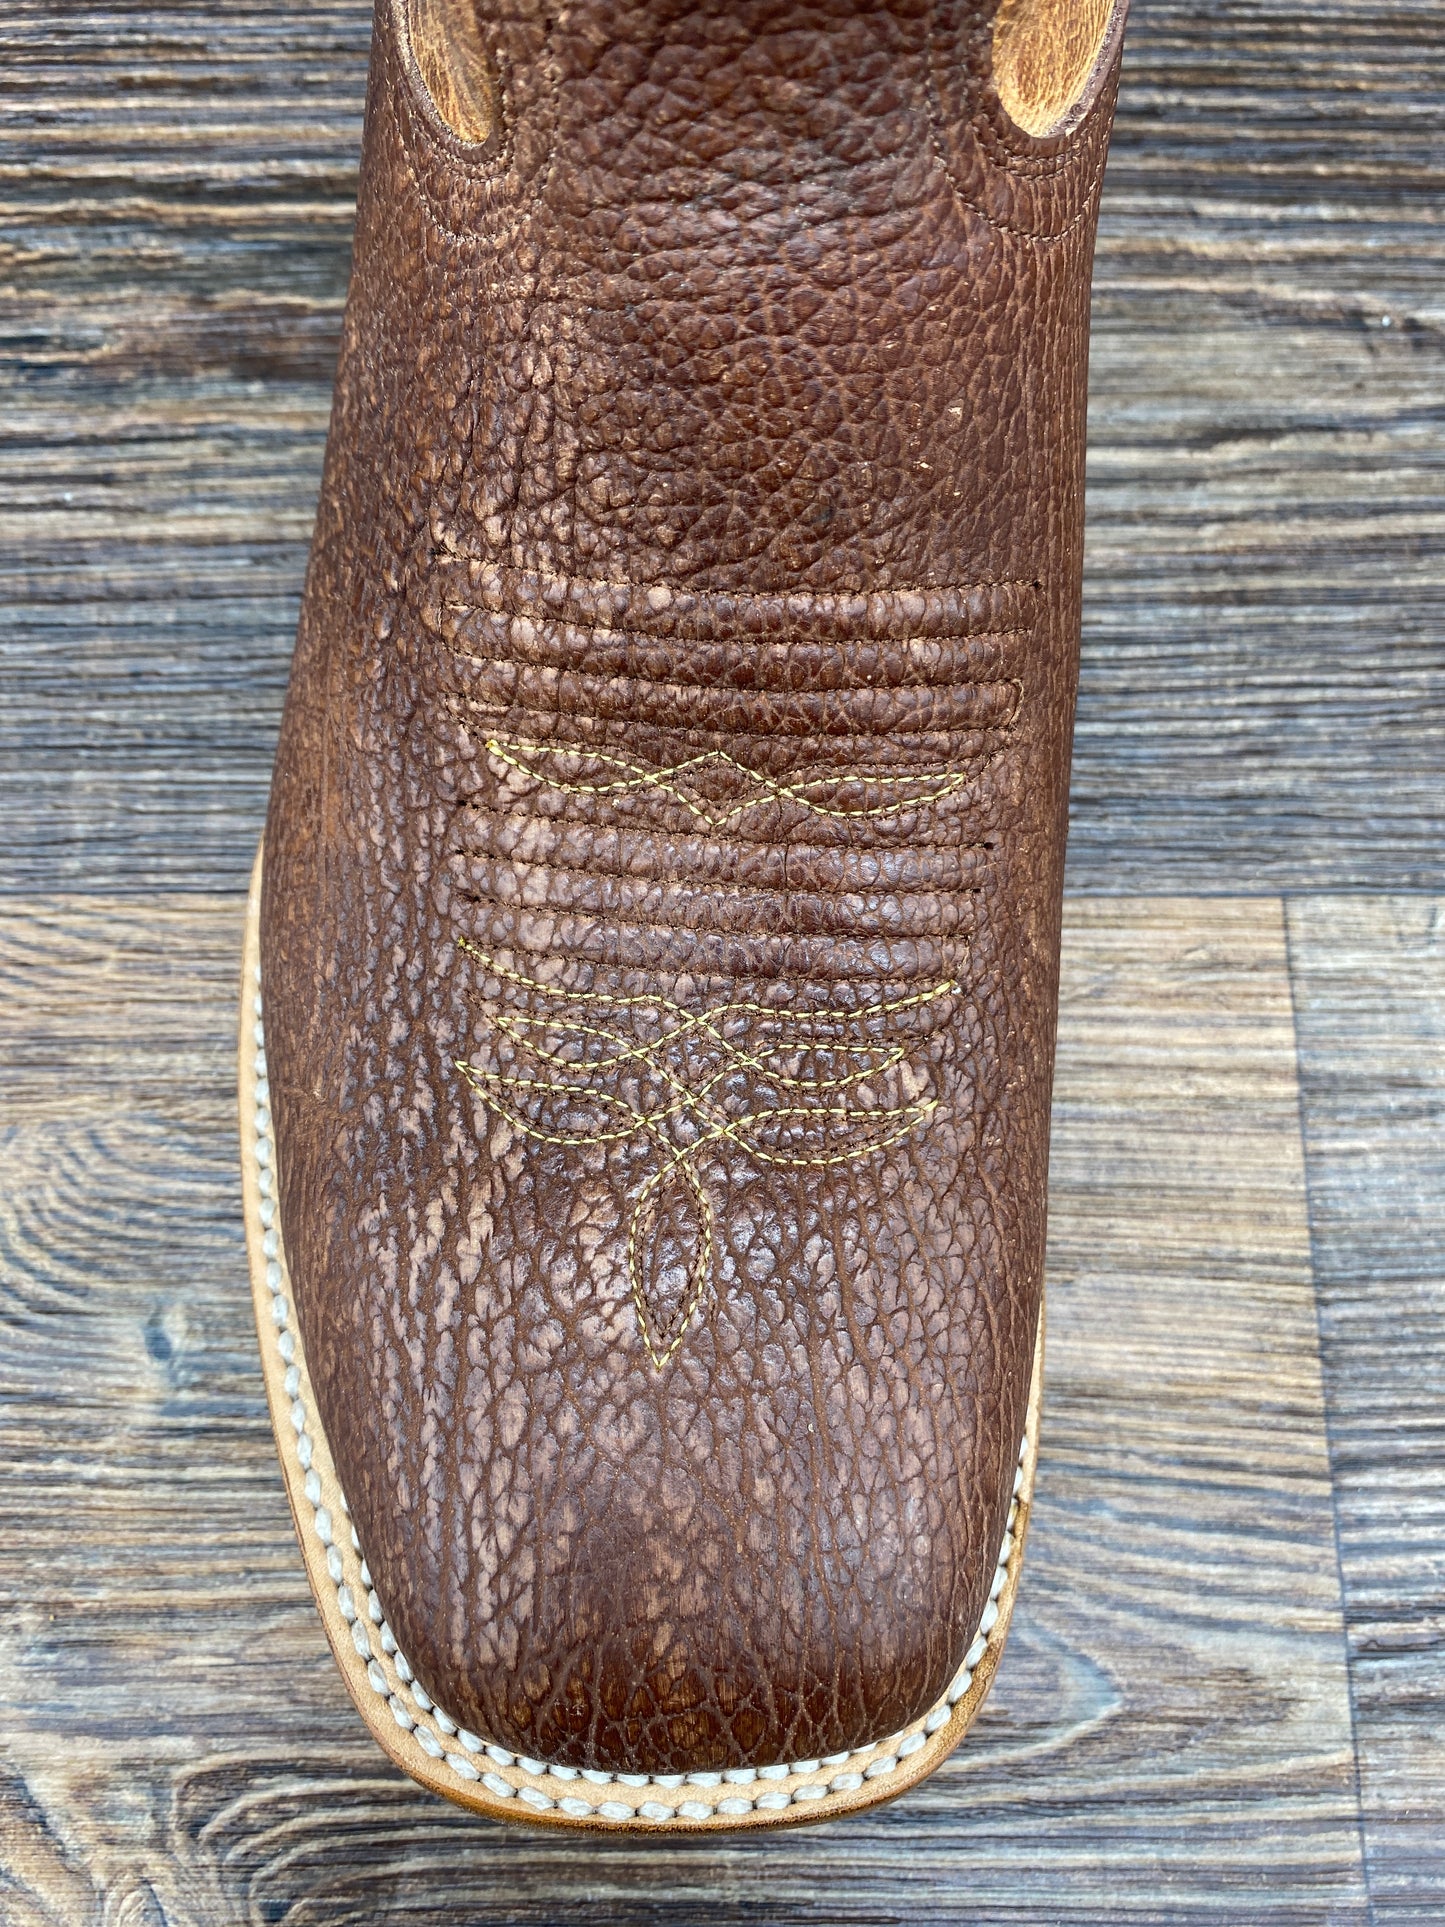 m4483-wf Men's Ryan Sanded Shark Western Boot in Cognac by Lucchese